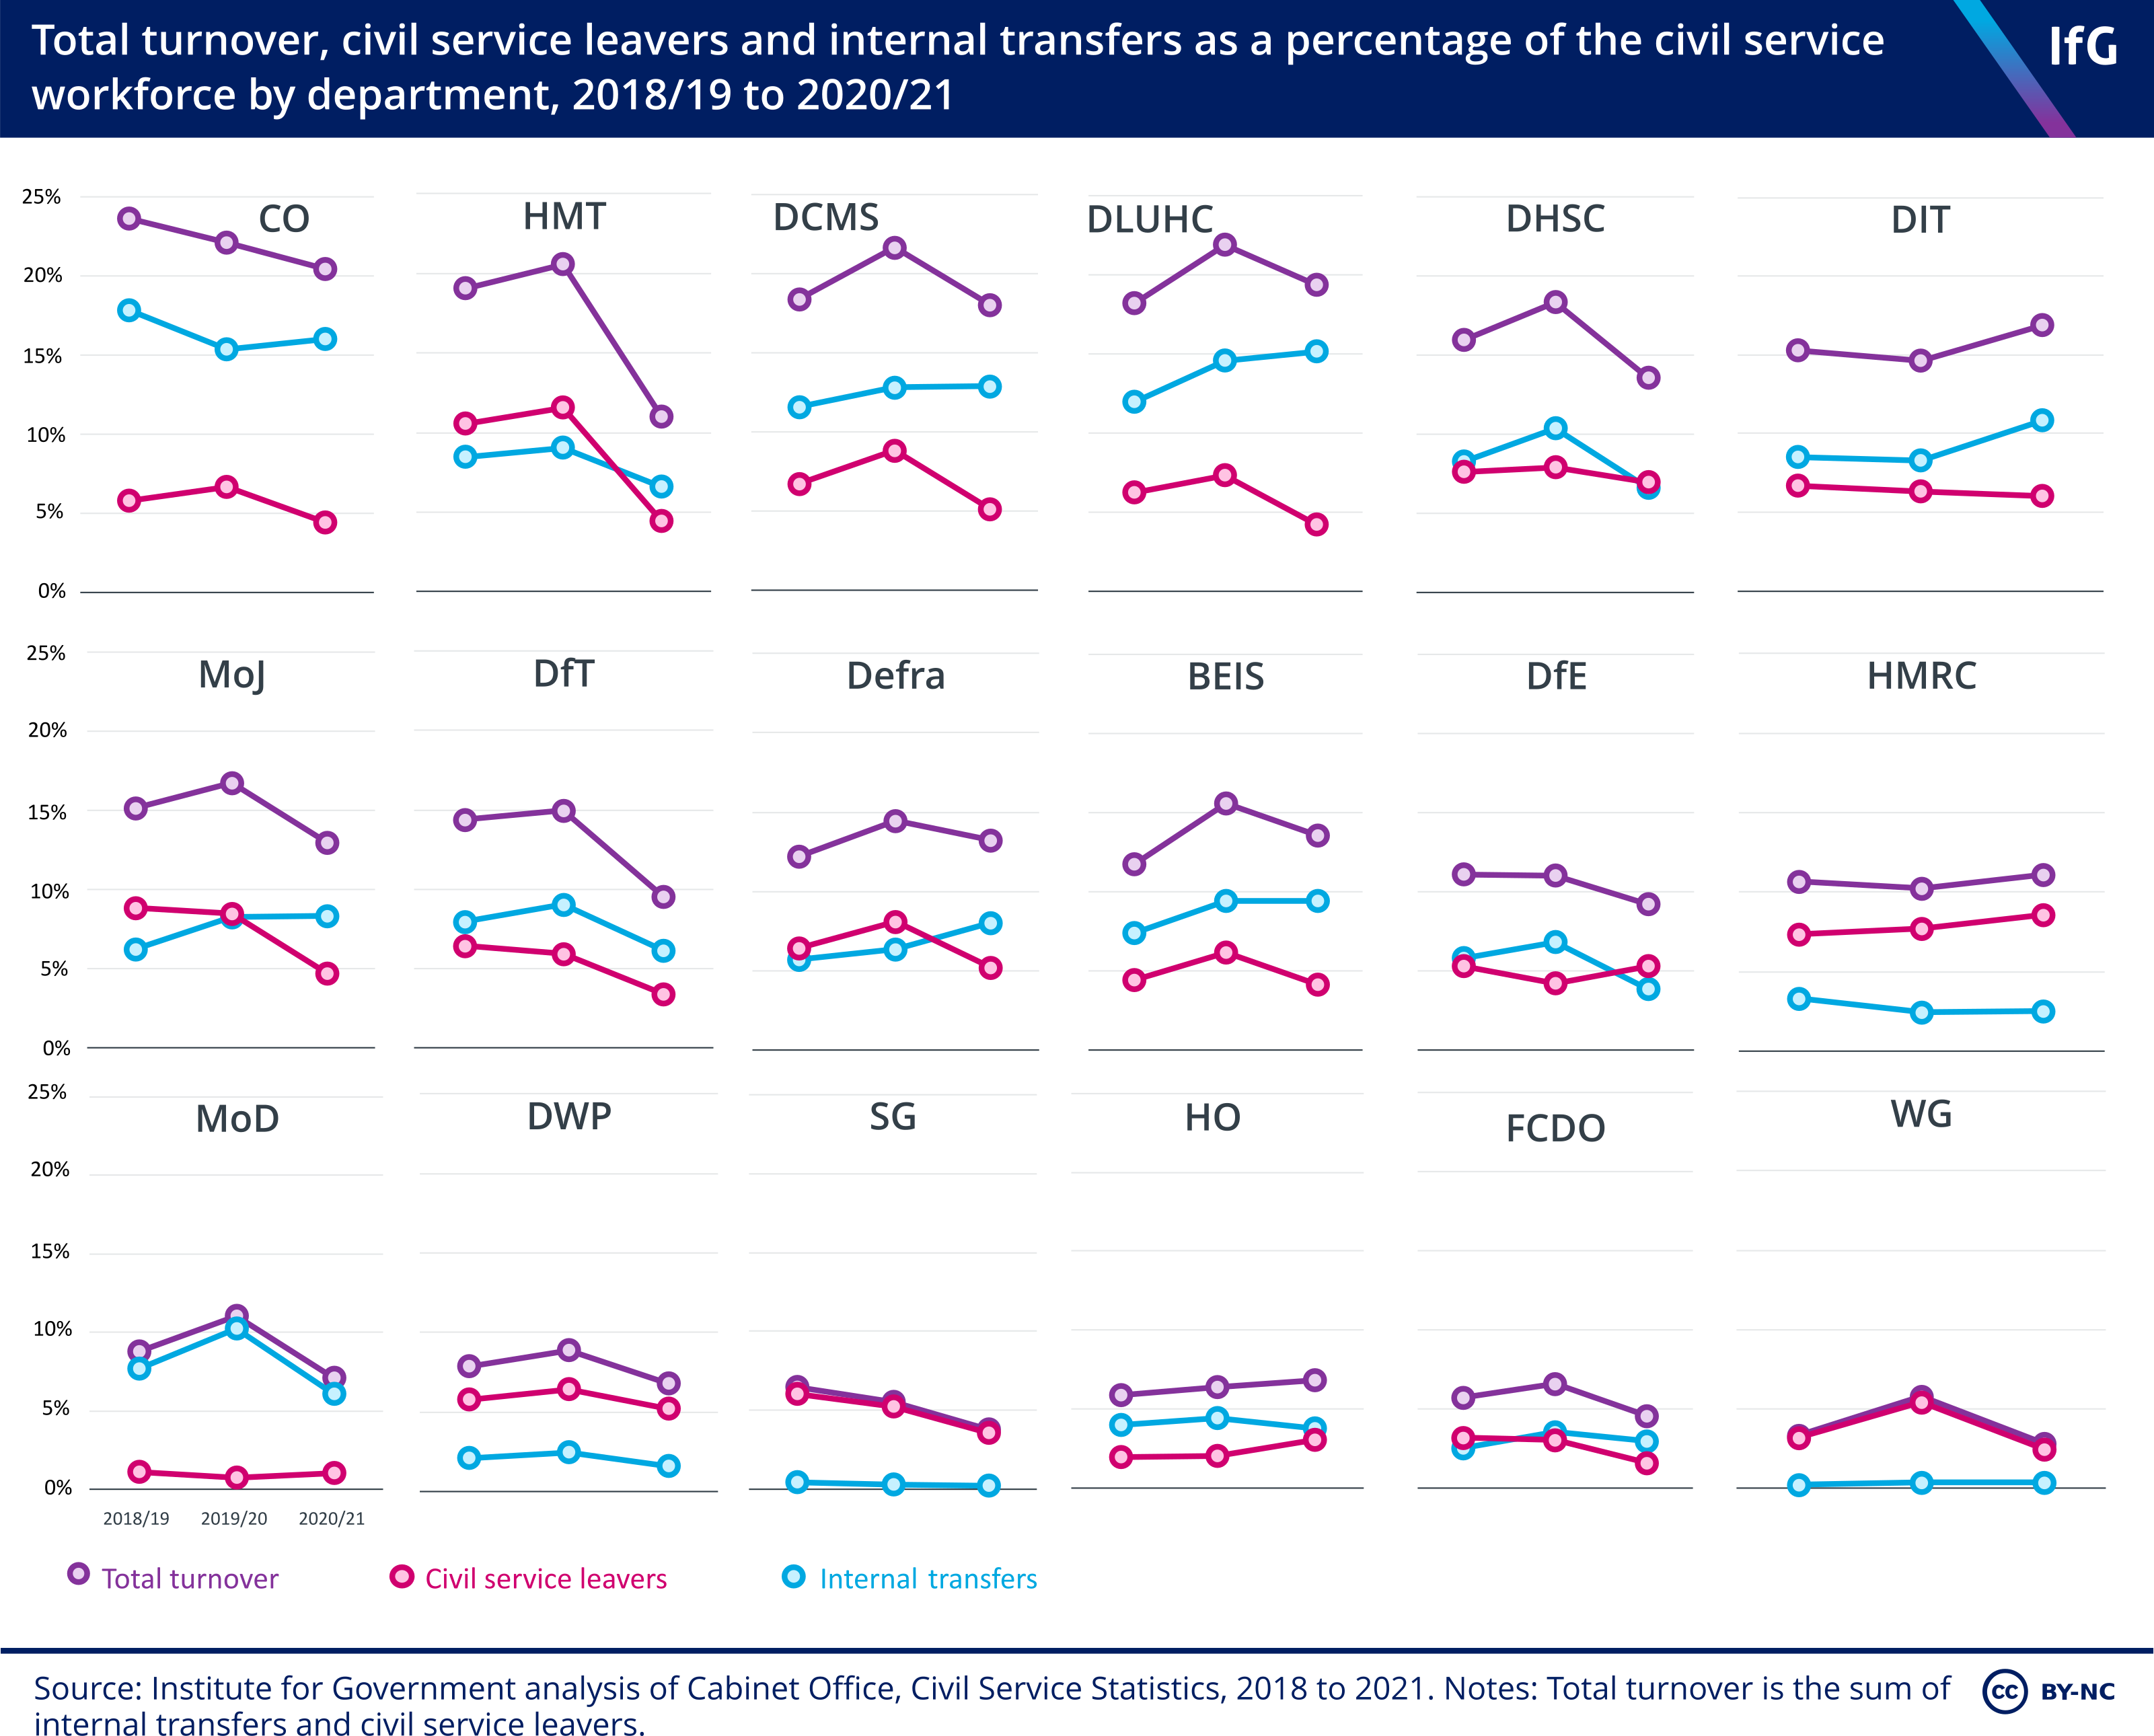 Total turnover civil service leavers and internal transfers as a percentage of the civil service workforce by department